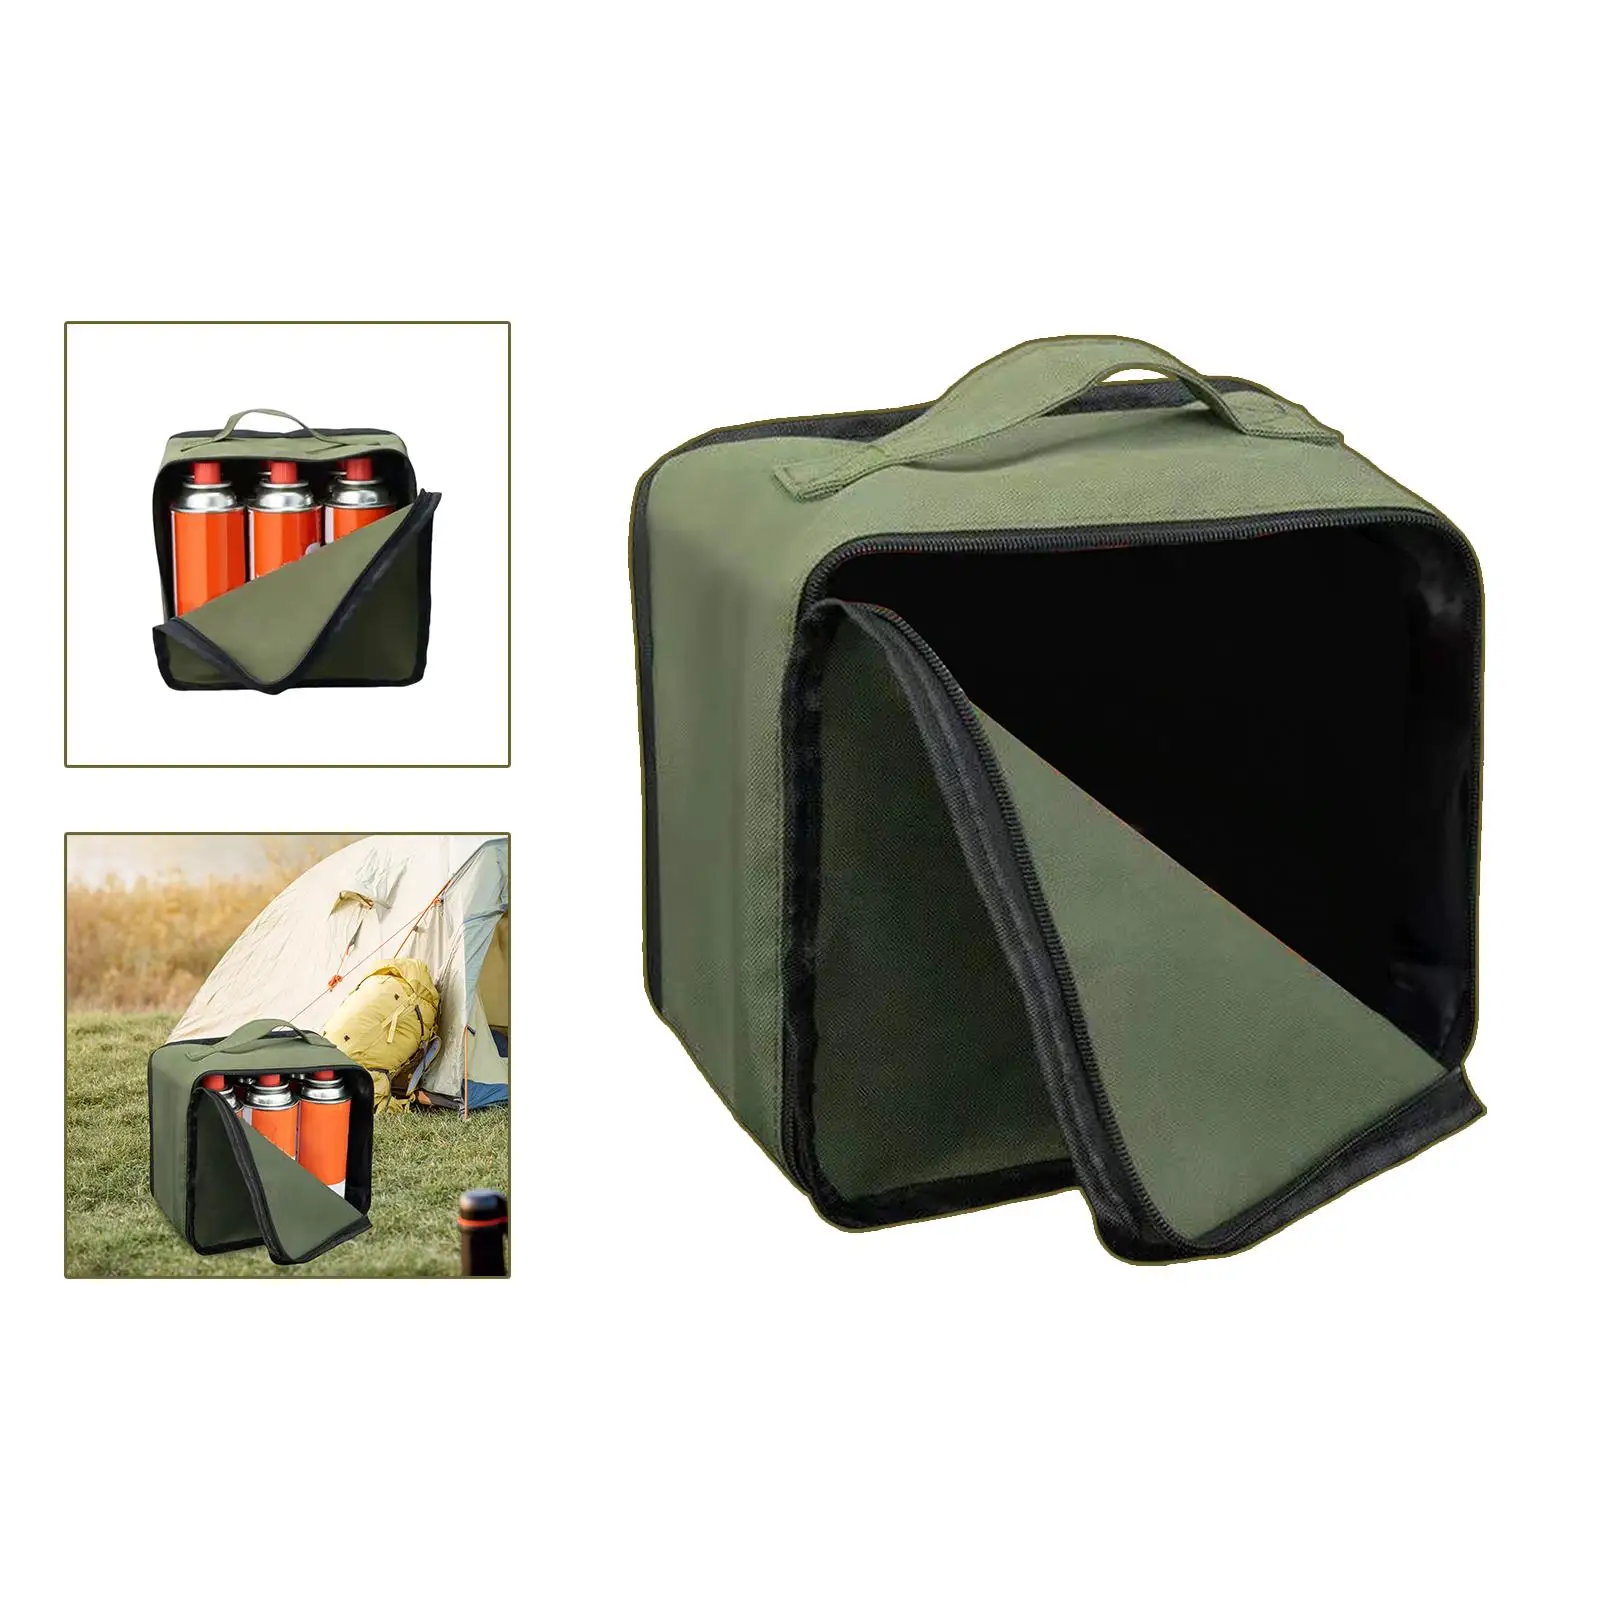 Portable Gas Tank Storage Bags Easy to Carry Utensils Bag Tool Bag for Hiking Picnic